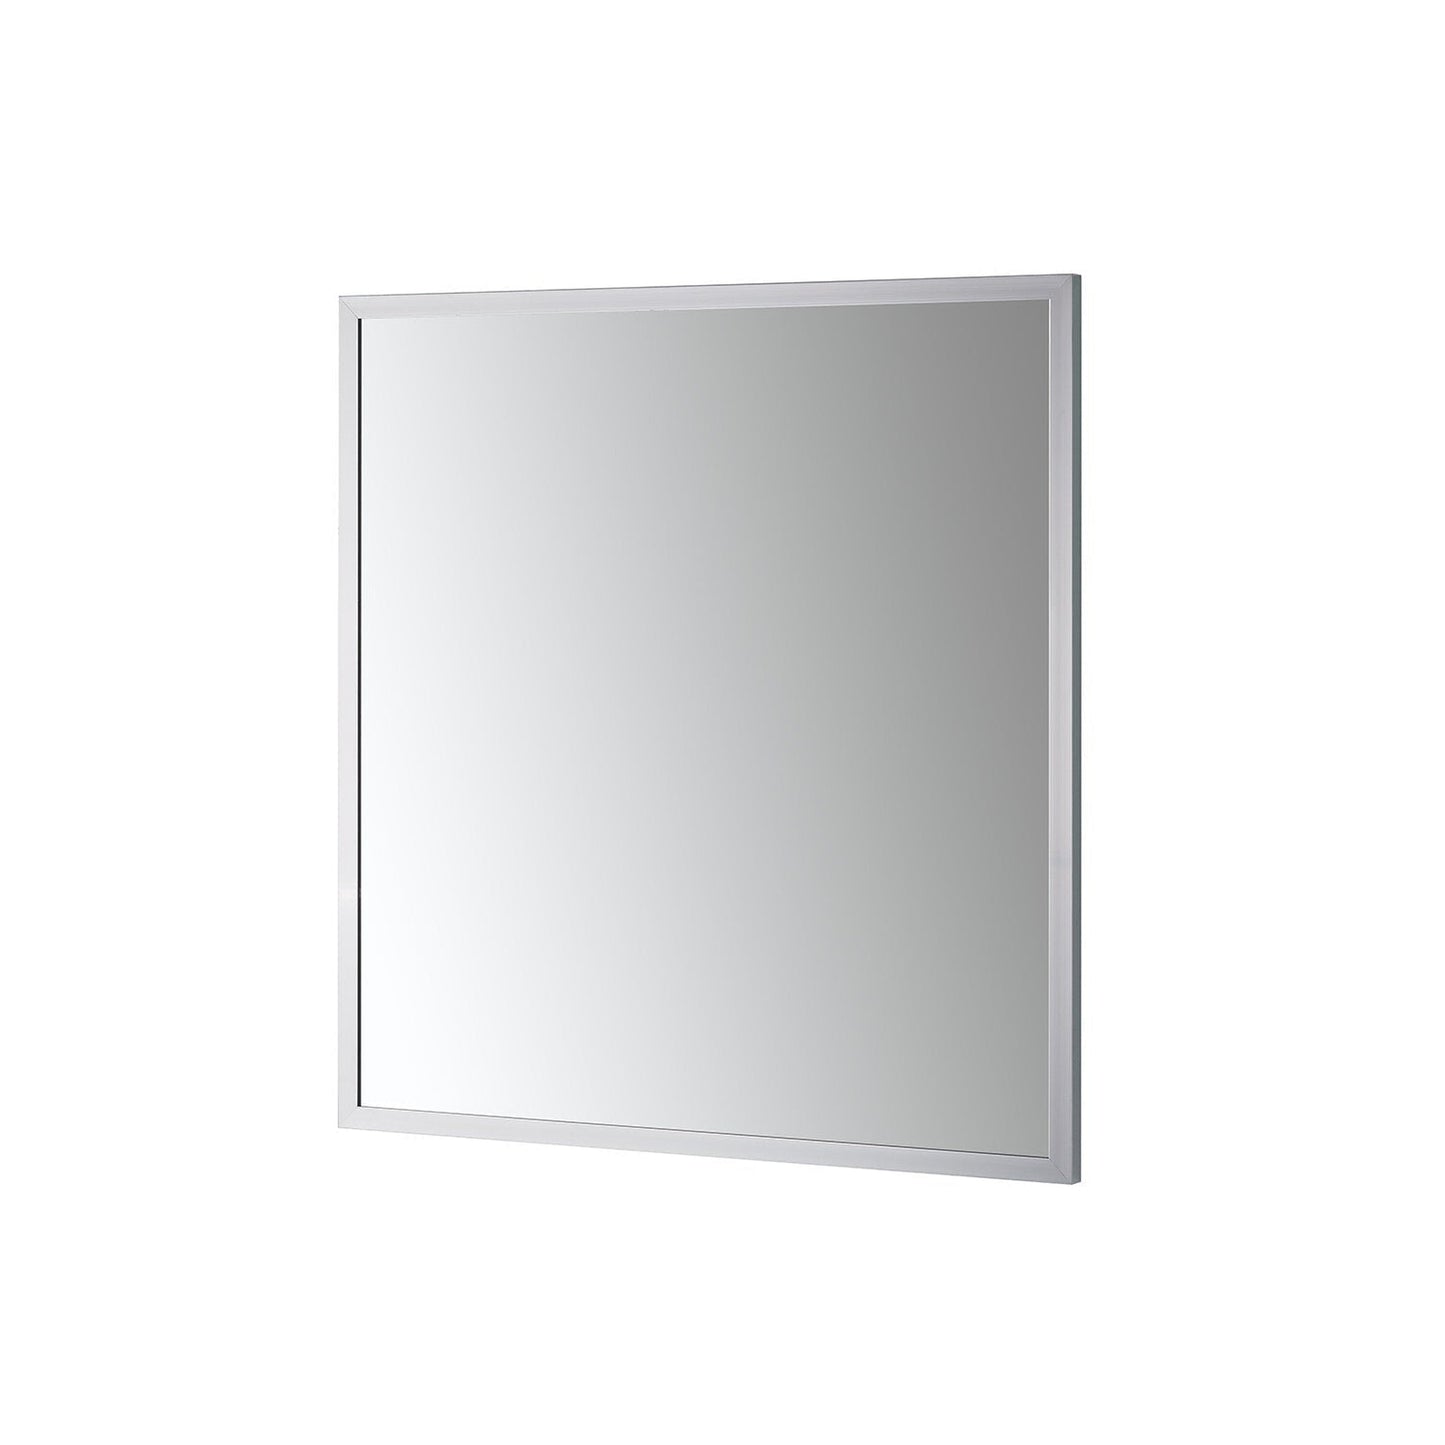 Luxaar Nuovo 34" x 36" Polished Chrome Wall-Mounted Framed Mirror